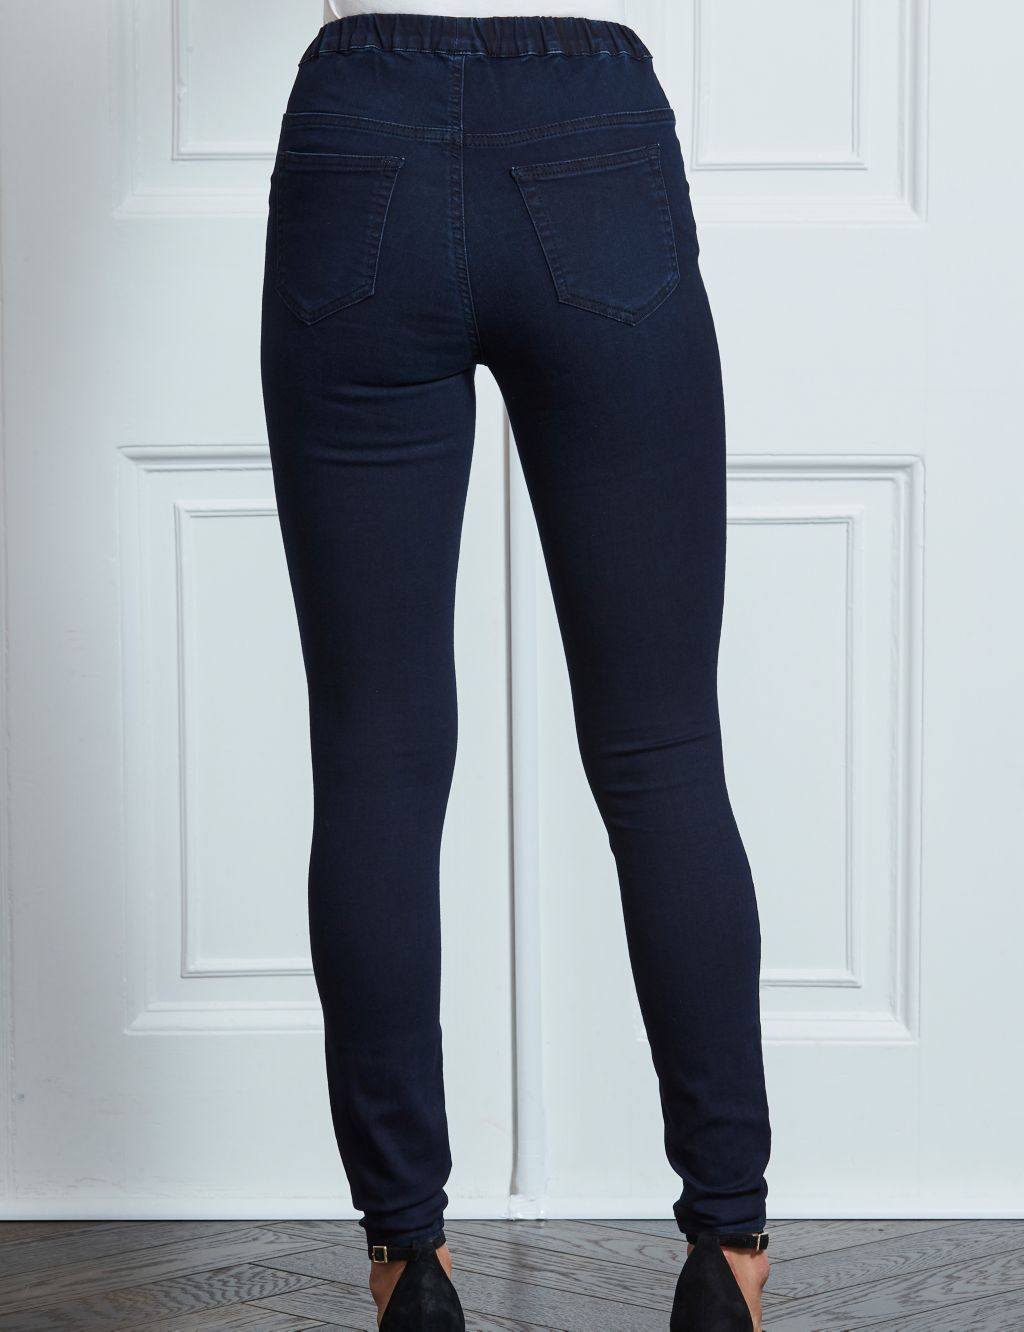 M&S £17.50 high-waist jeggings in 13 colours shoppers 'can't give up' -  Wales Online